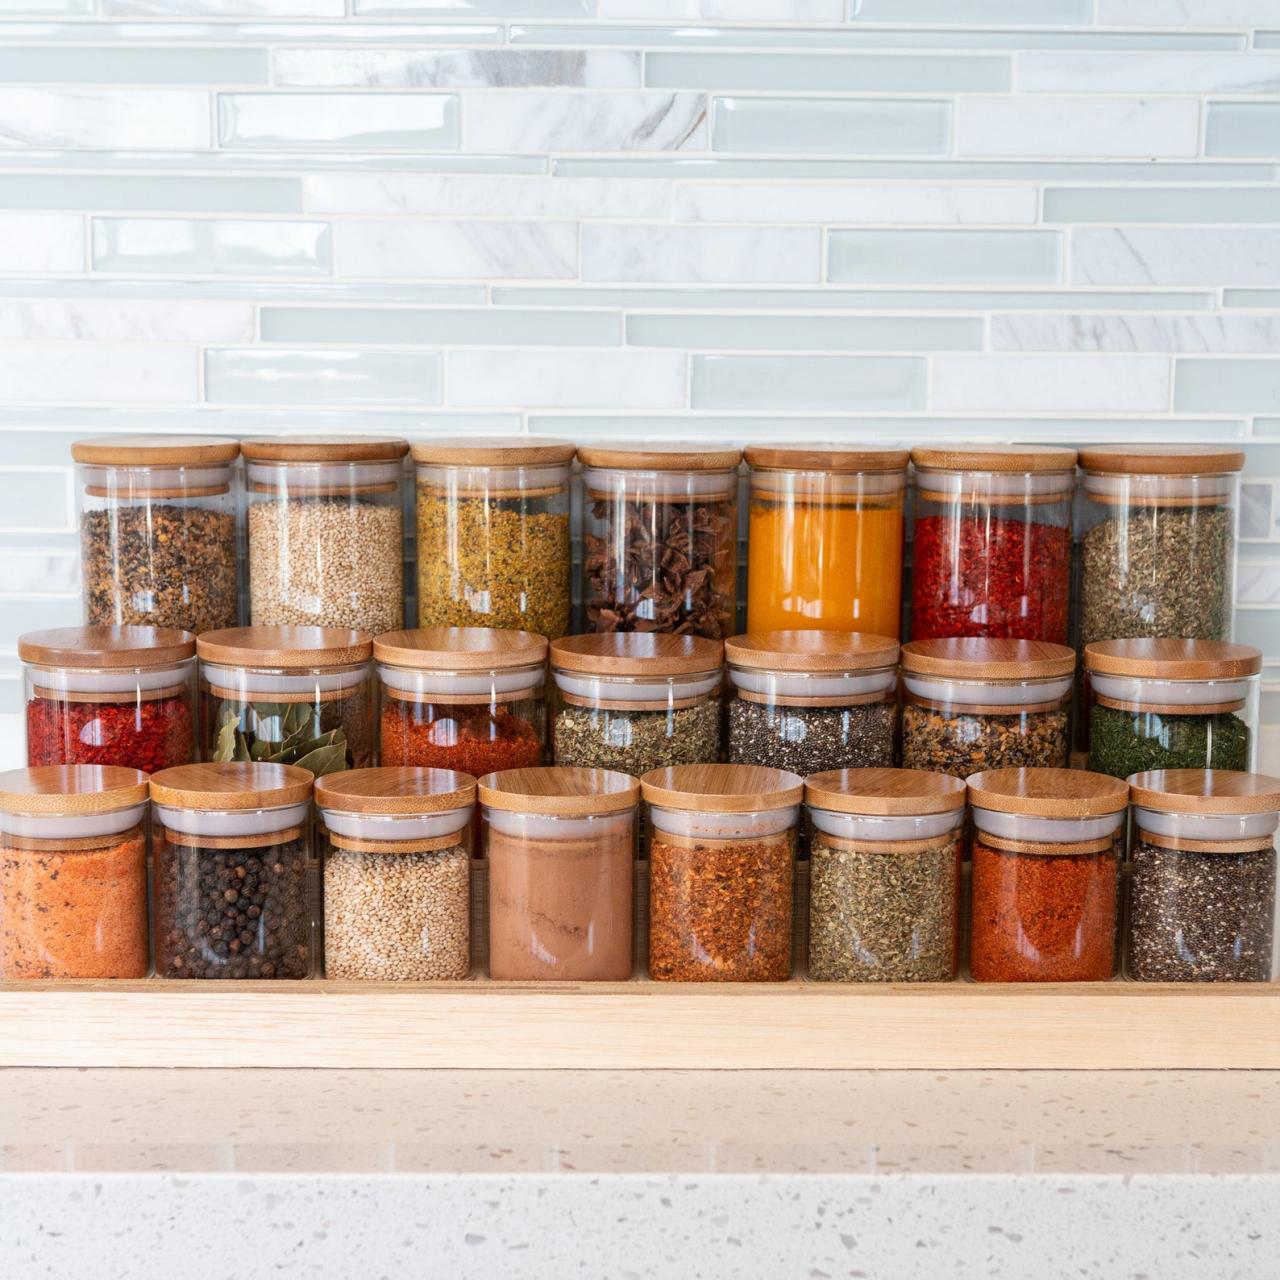 Spice Organization Ideas: After a Million Failures, This Spice Organization  Hack Worked for Me